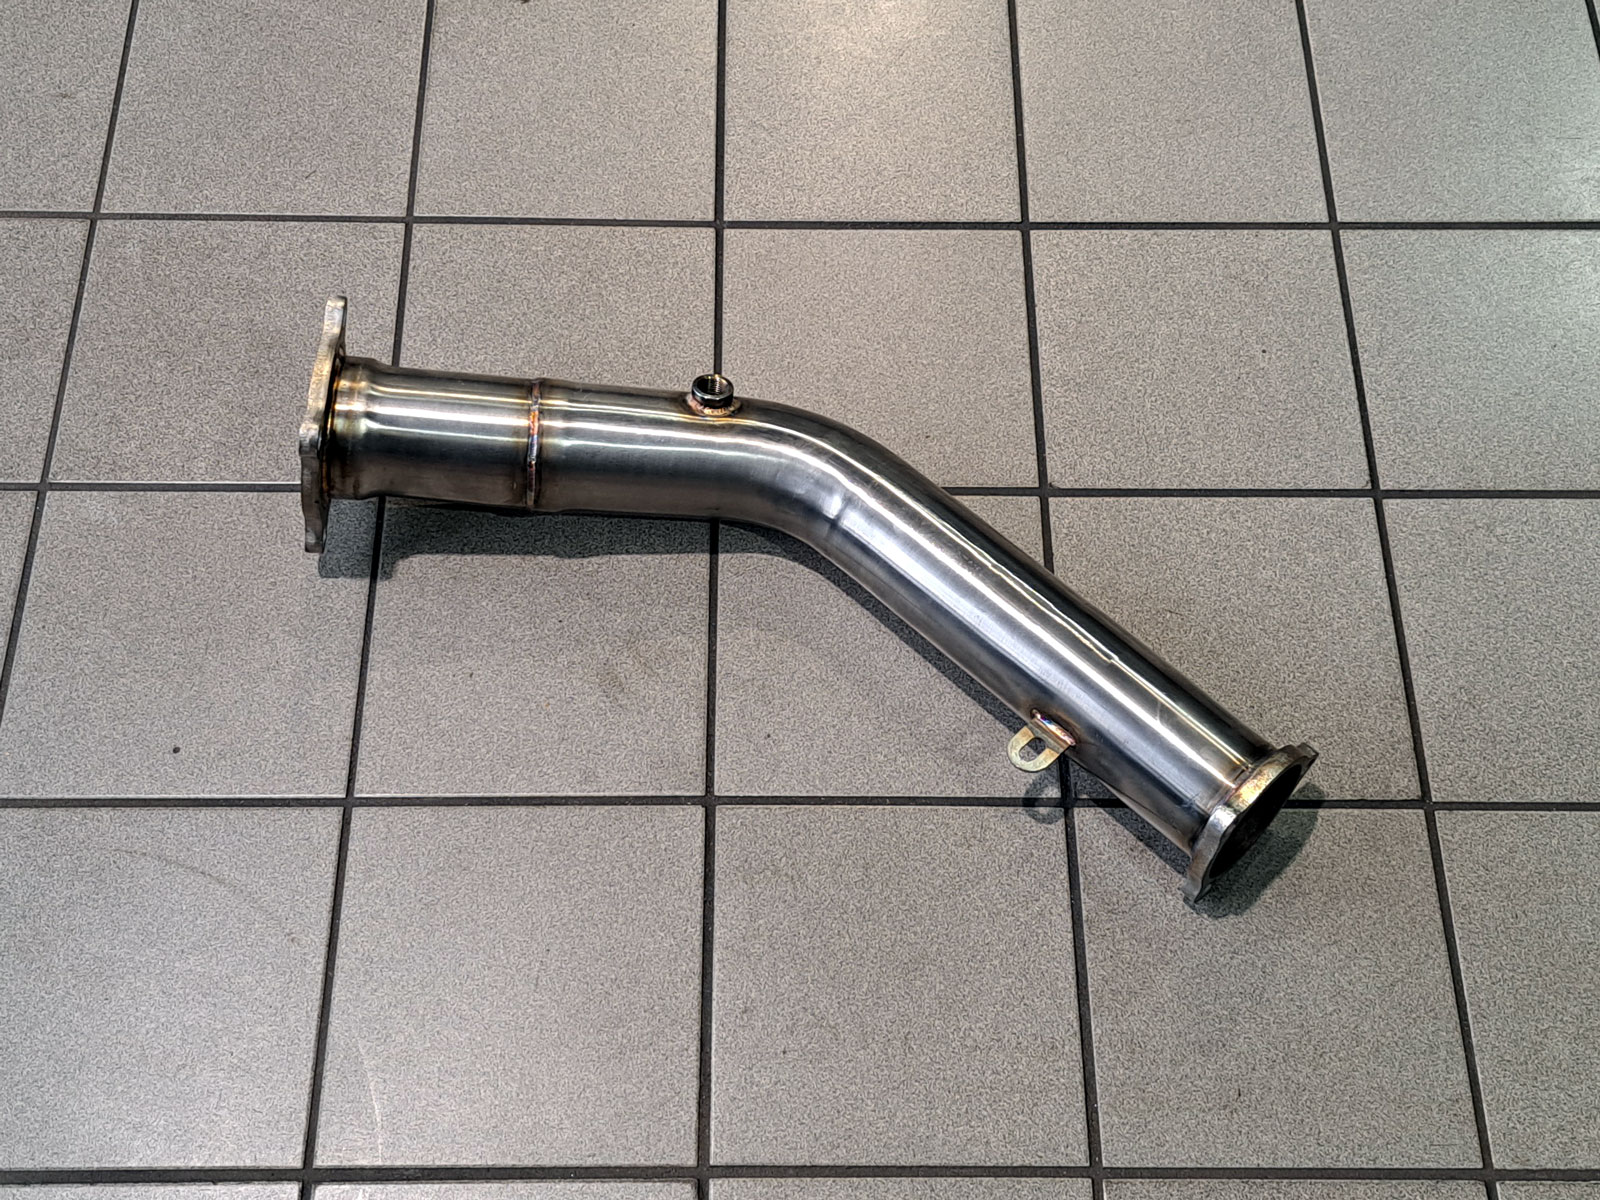 Audi Q5 2.0 TFSI - Stainless Steel Decat Pipe